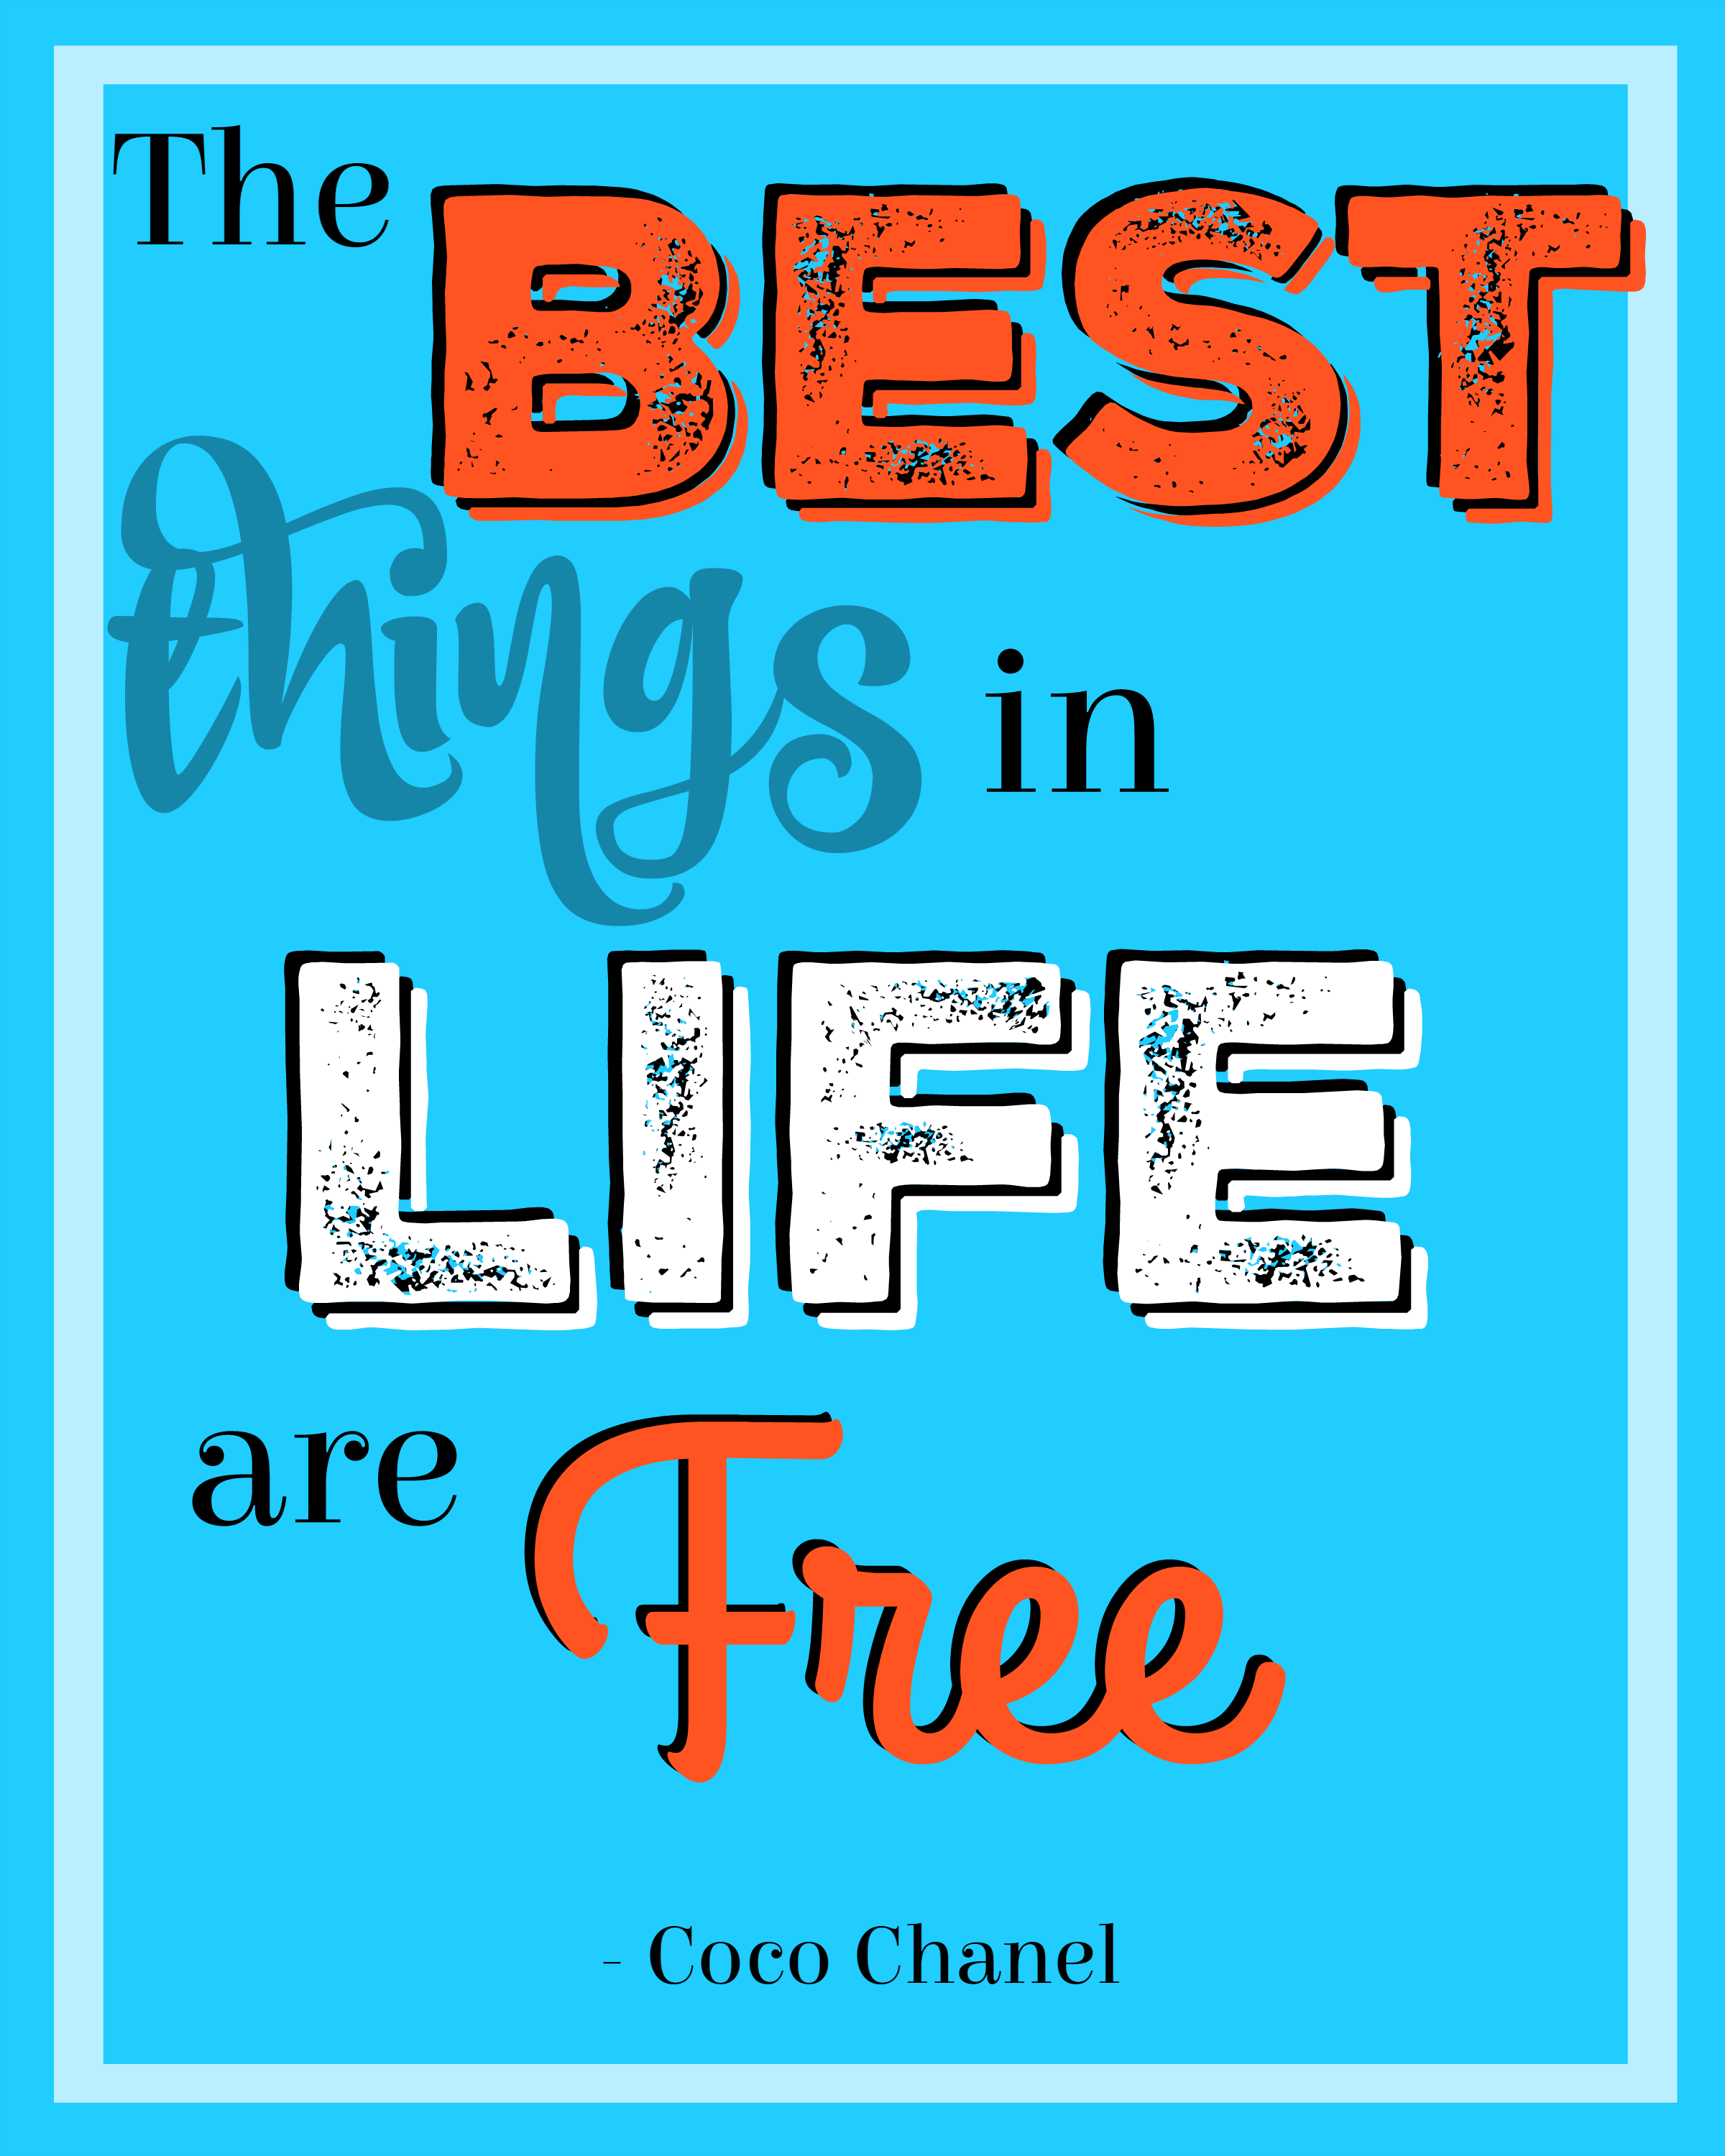 Free printable quote (8x10): "The best things in life are free" - Coco Chanel